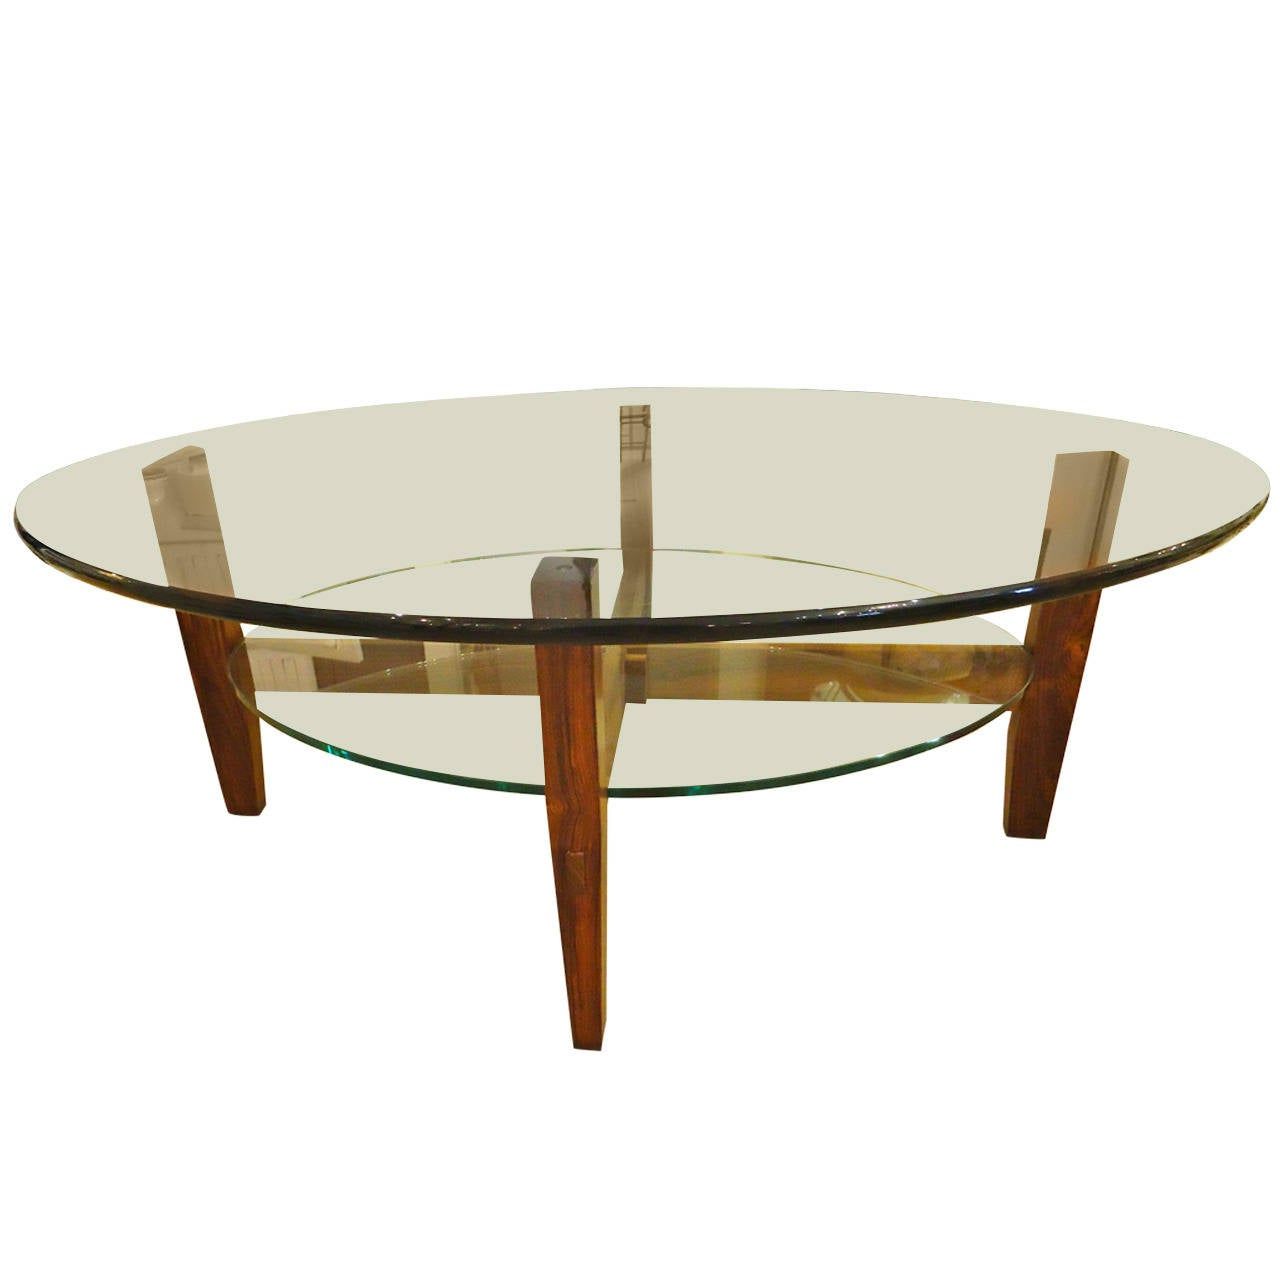 Two Tier Rosewood And Oval Glass Coffee Cocktail Table At For Fashionable Glass And Gold Oval Coffee Tables (Gallery 14 of 20)